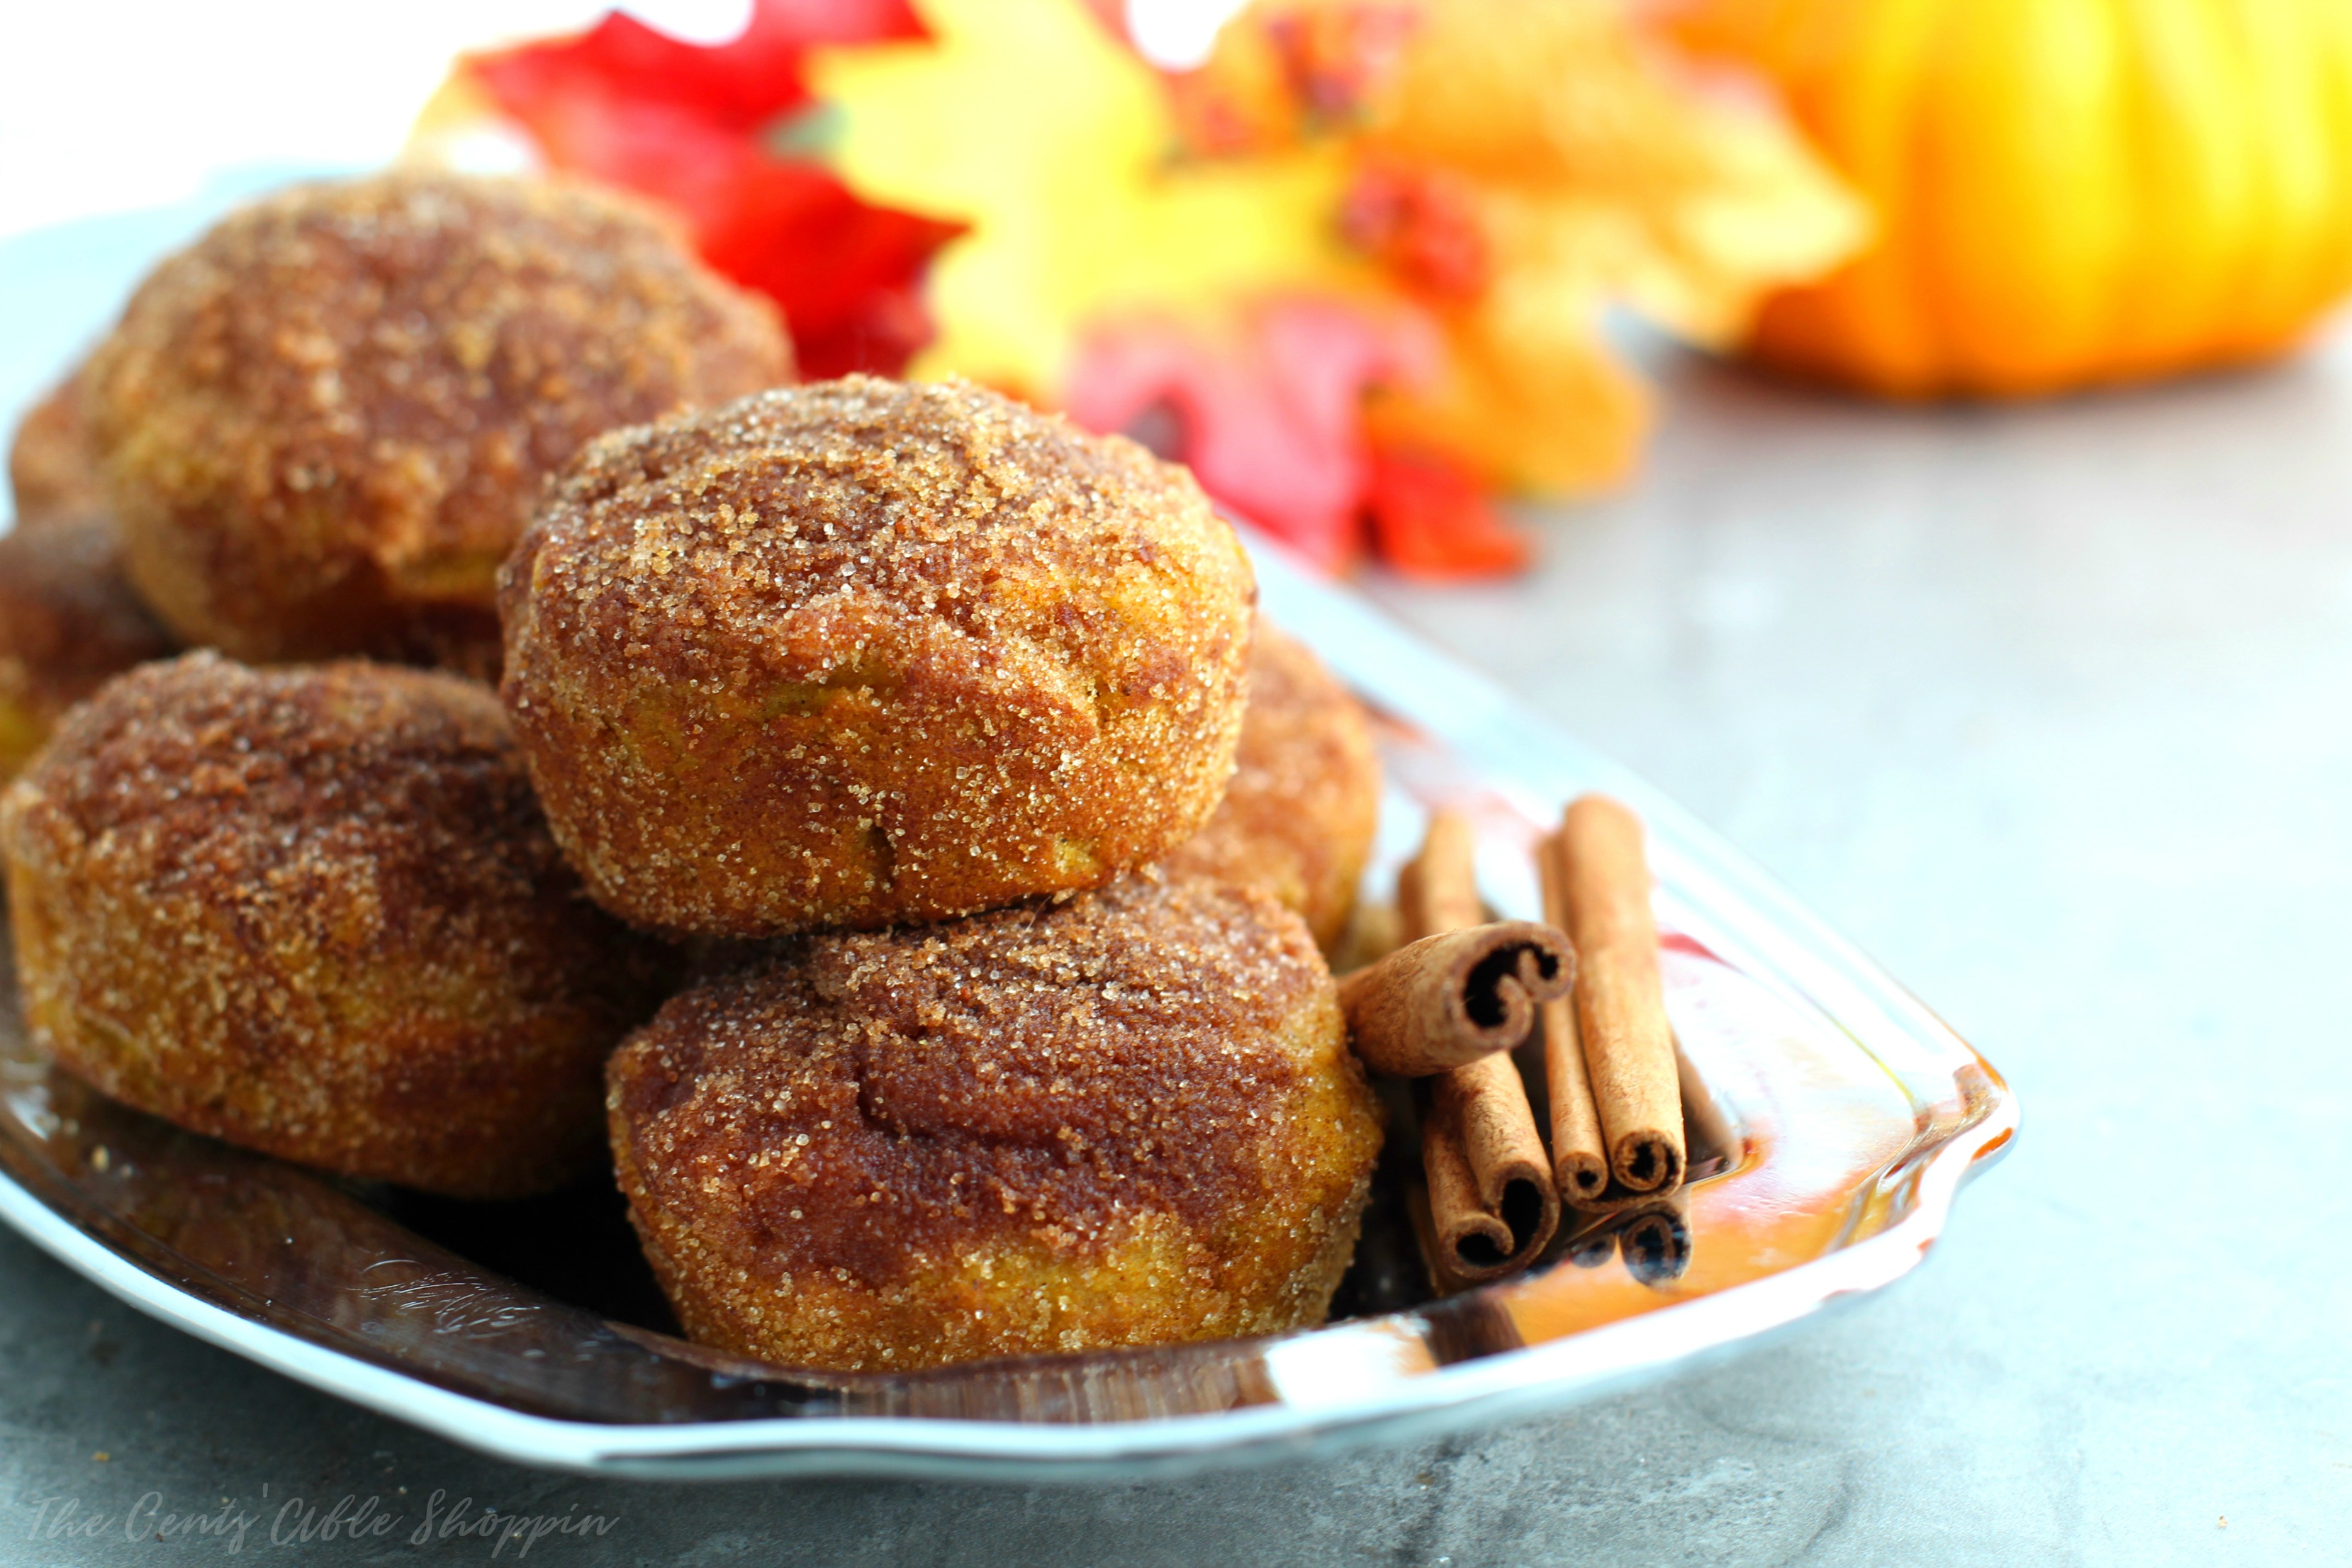 These Gluten Free Pumpkin Spice Muffins are soft, fluffy and sweet - made with the perfect amount of pumpkin spice. The perfect way to welcome fall!